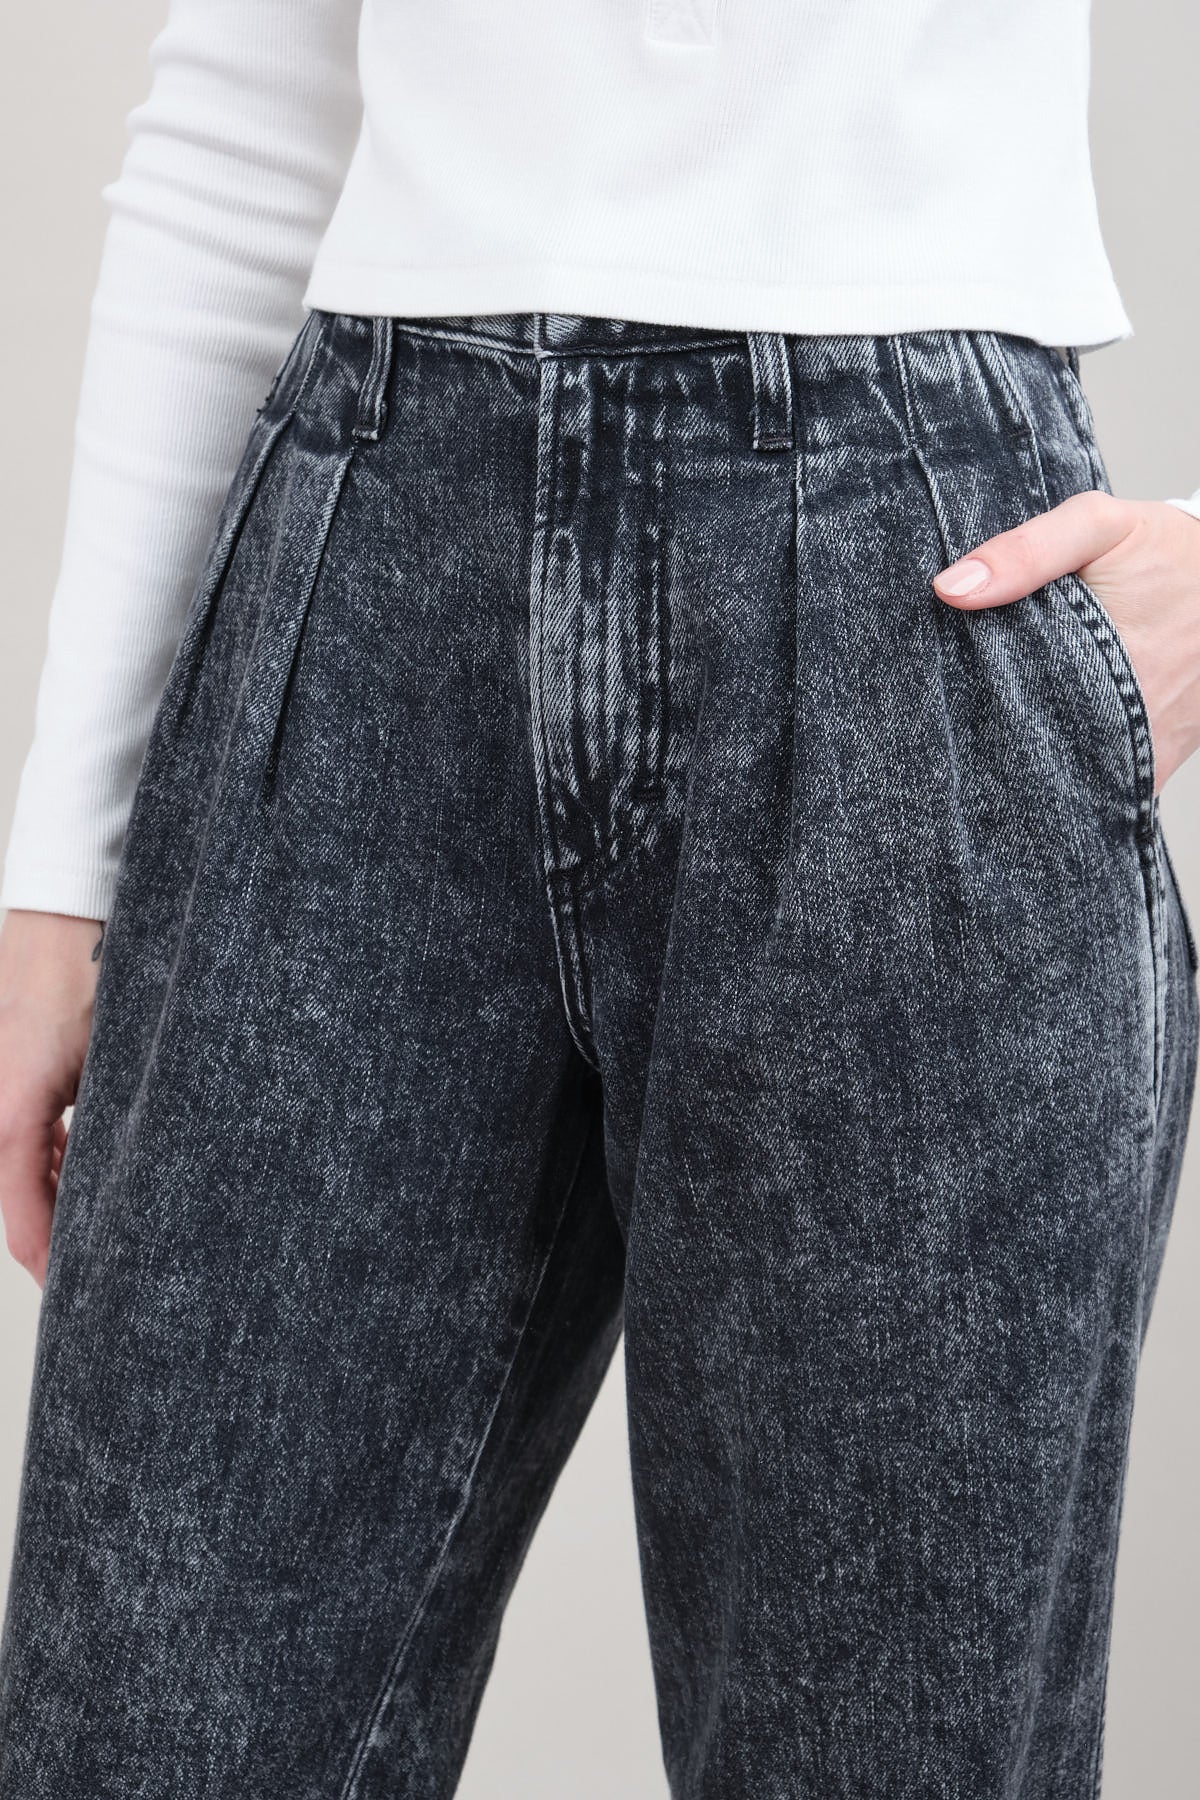 Rise on Marcella Pleated Jean